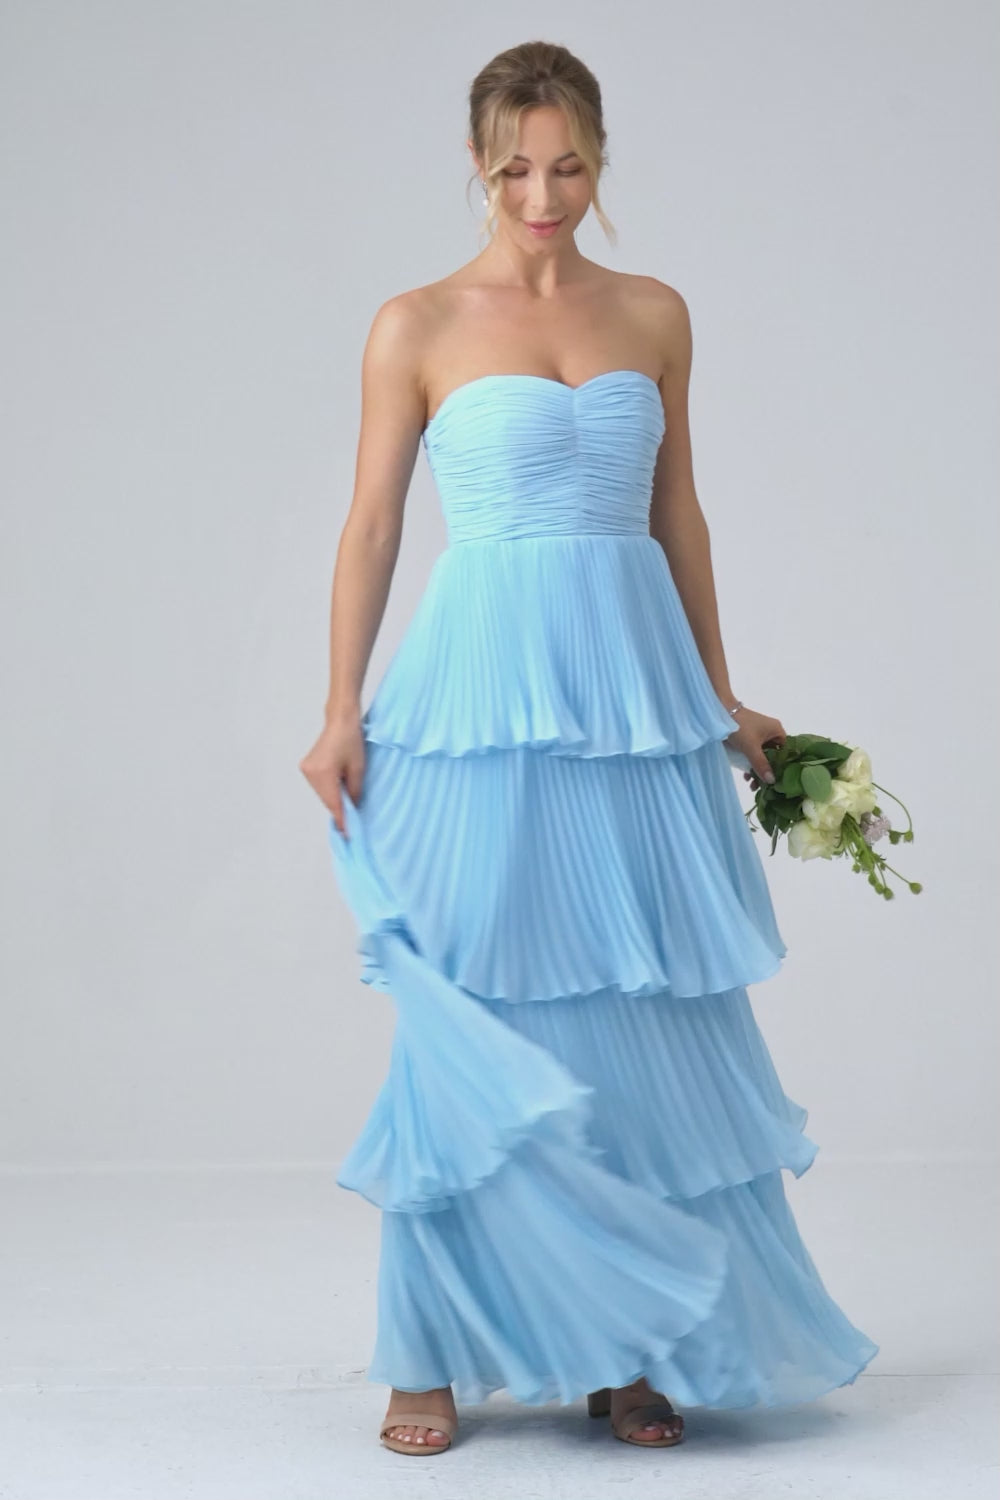 Sky Blue Sweetheart Pleated Tiered Long Bridesmaid Dress